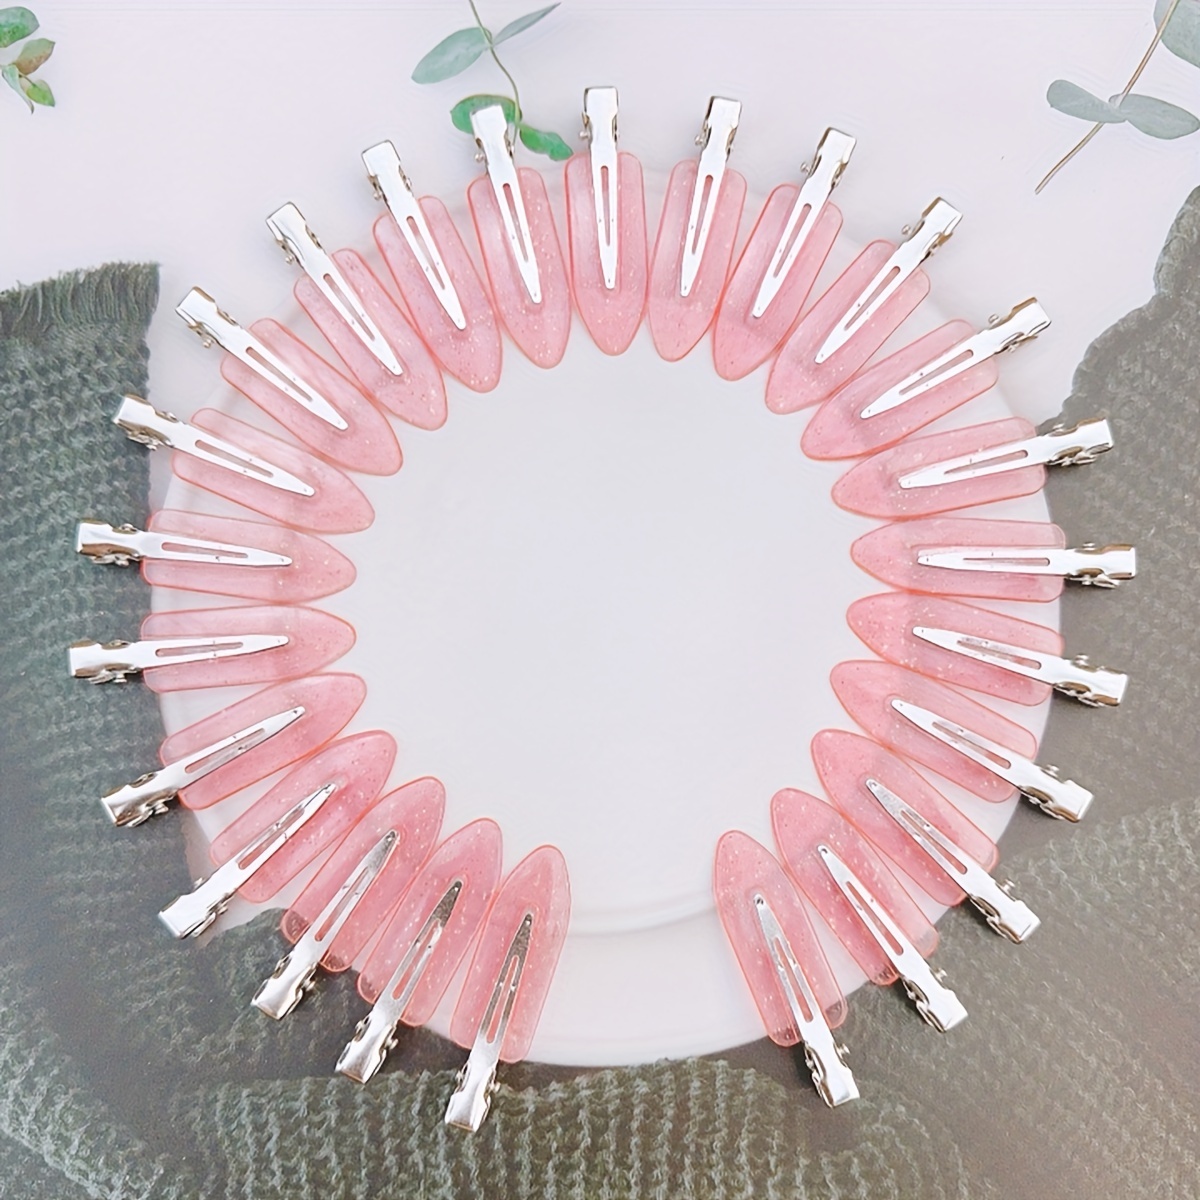 

Szelevens 24-piece Hair Clips Set, Elegant Cute Oblong Shape With Sequins, No-crease Plastic Hairpins For Styling, Makeup Application, Salon Use - Suitable For Ages 14+ (translucent Pink)